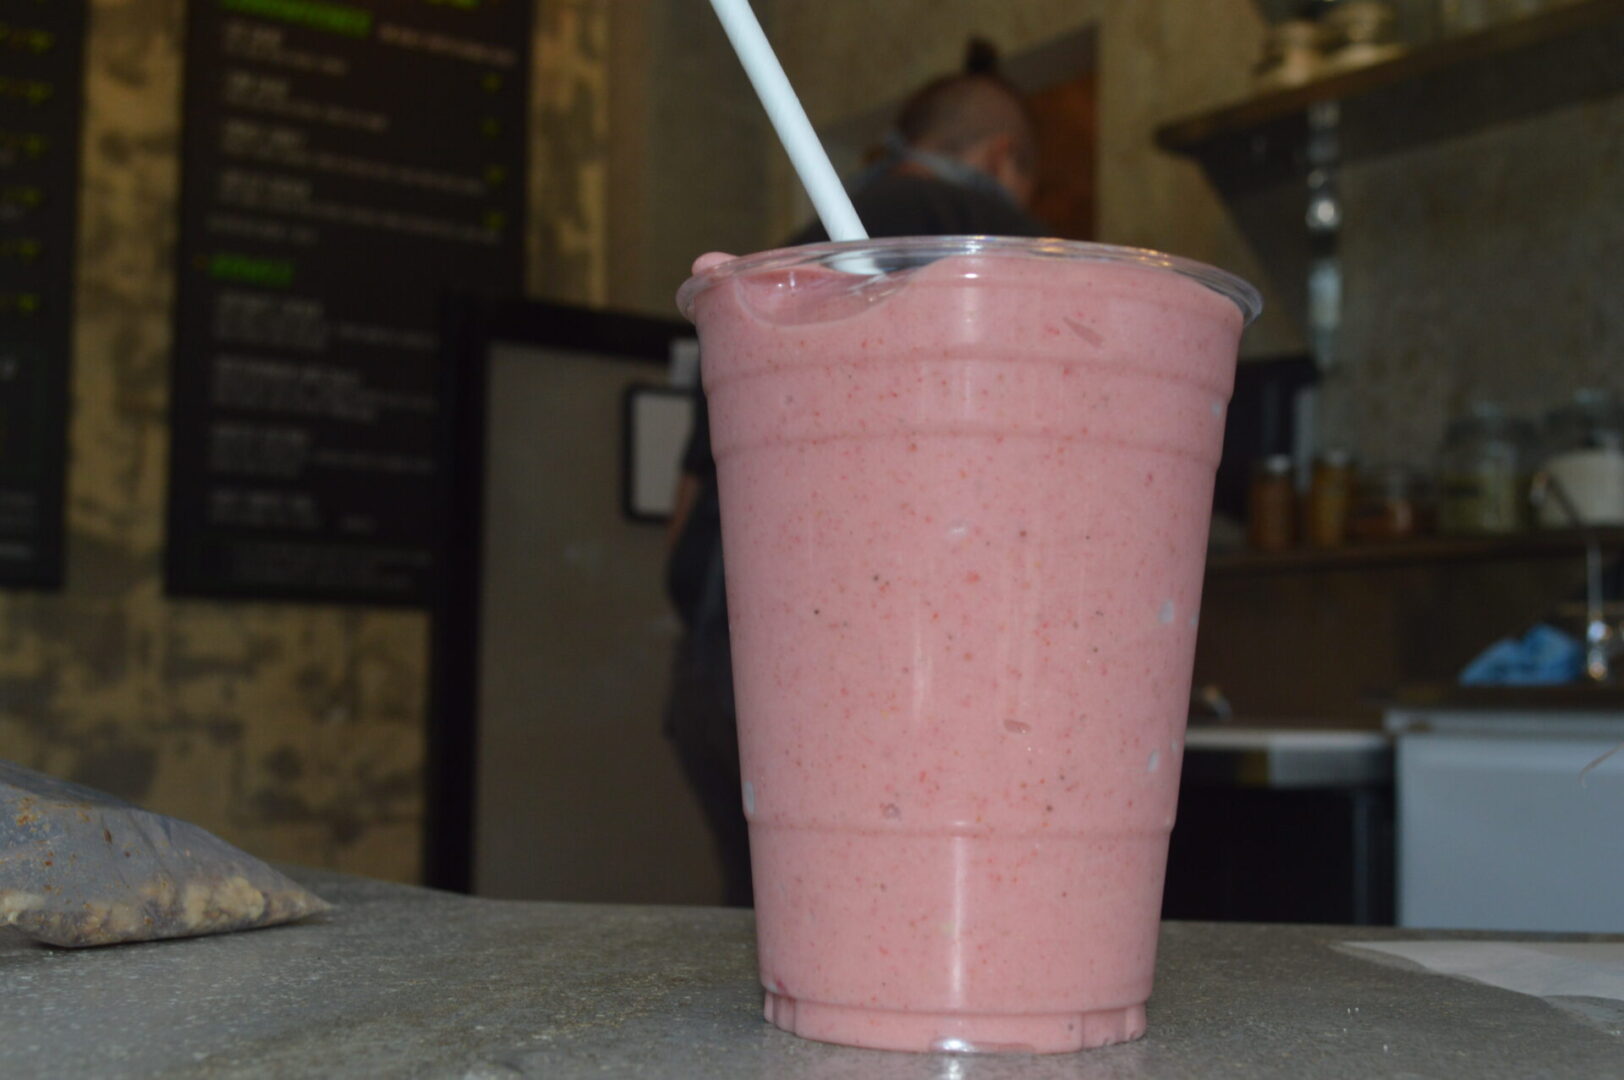 A pink smoothie in a plastic cup with a straw.